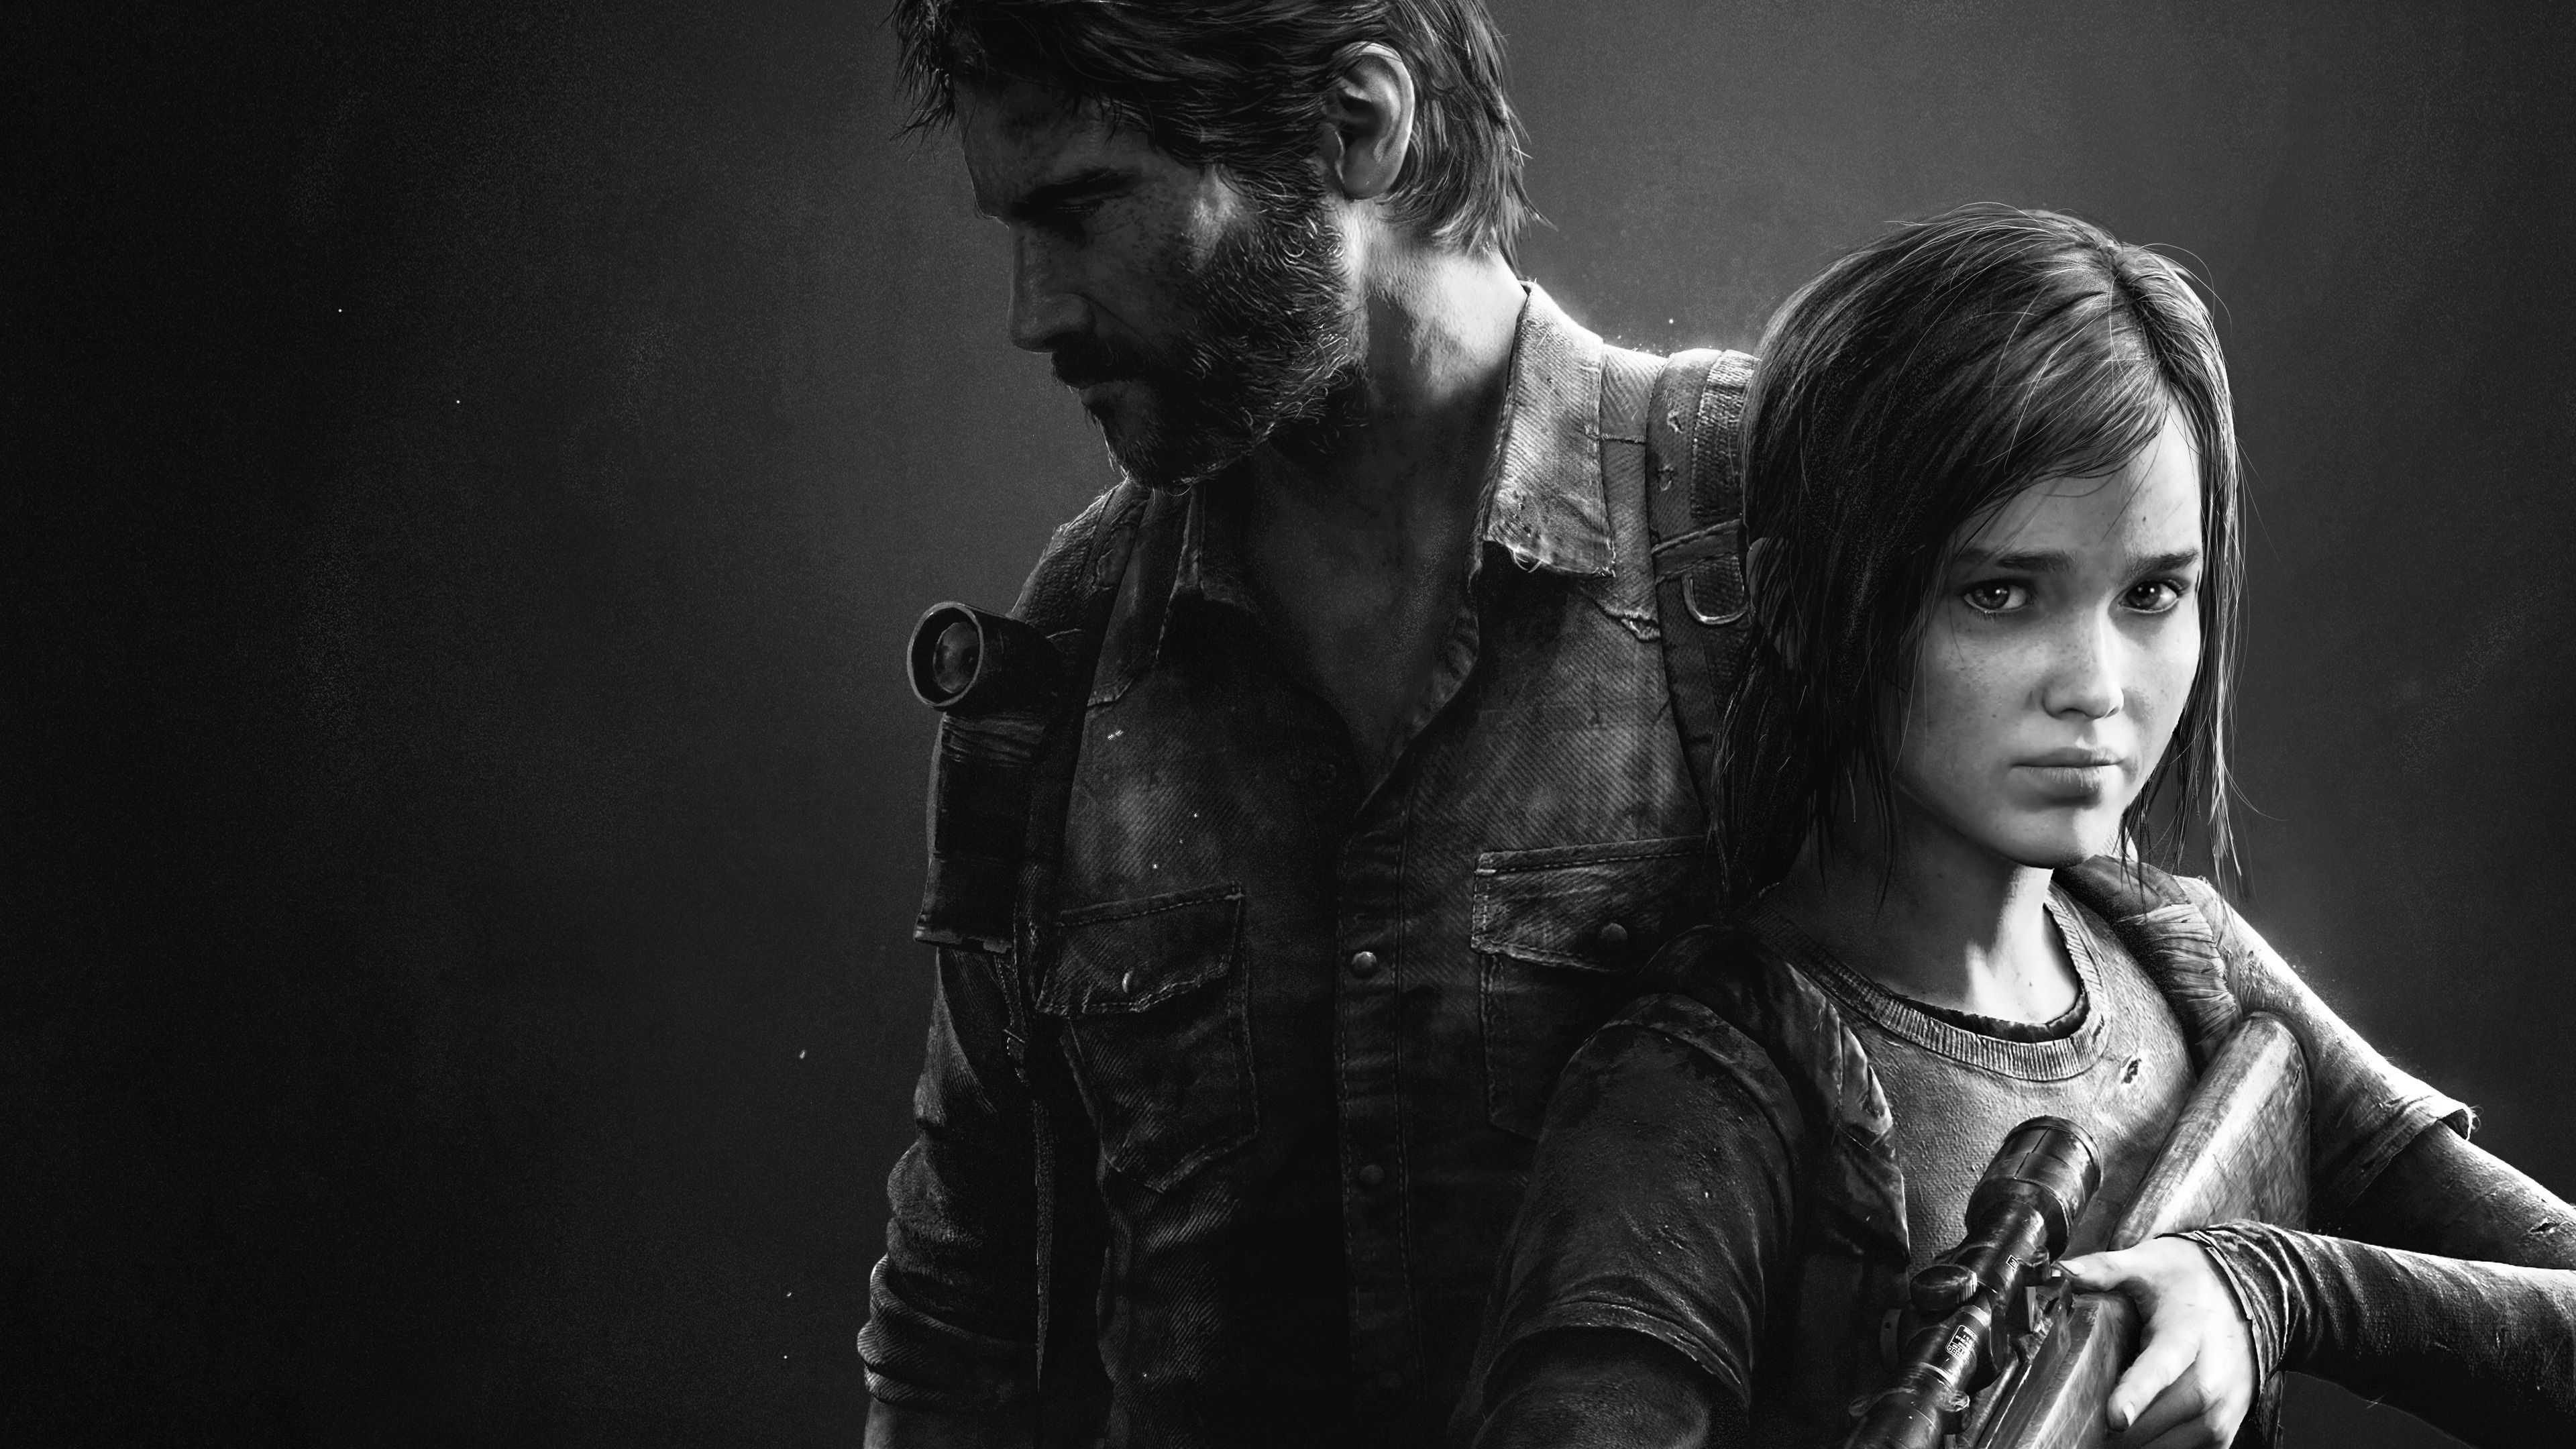 The Last Of Us 4k Wallpapers Wallpaper Cave